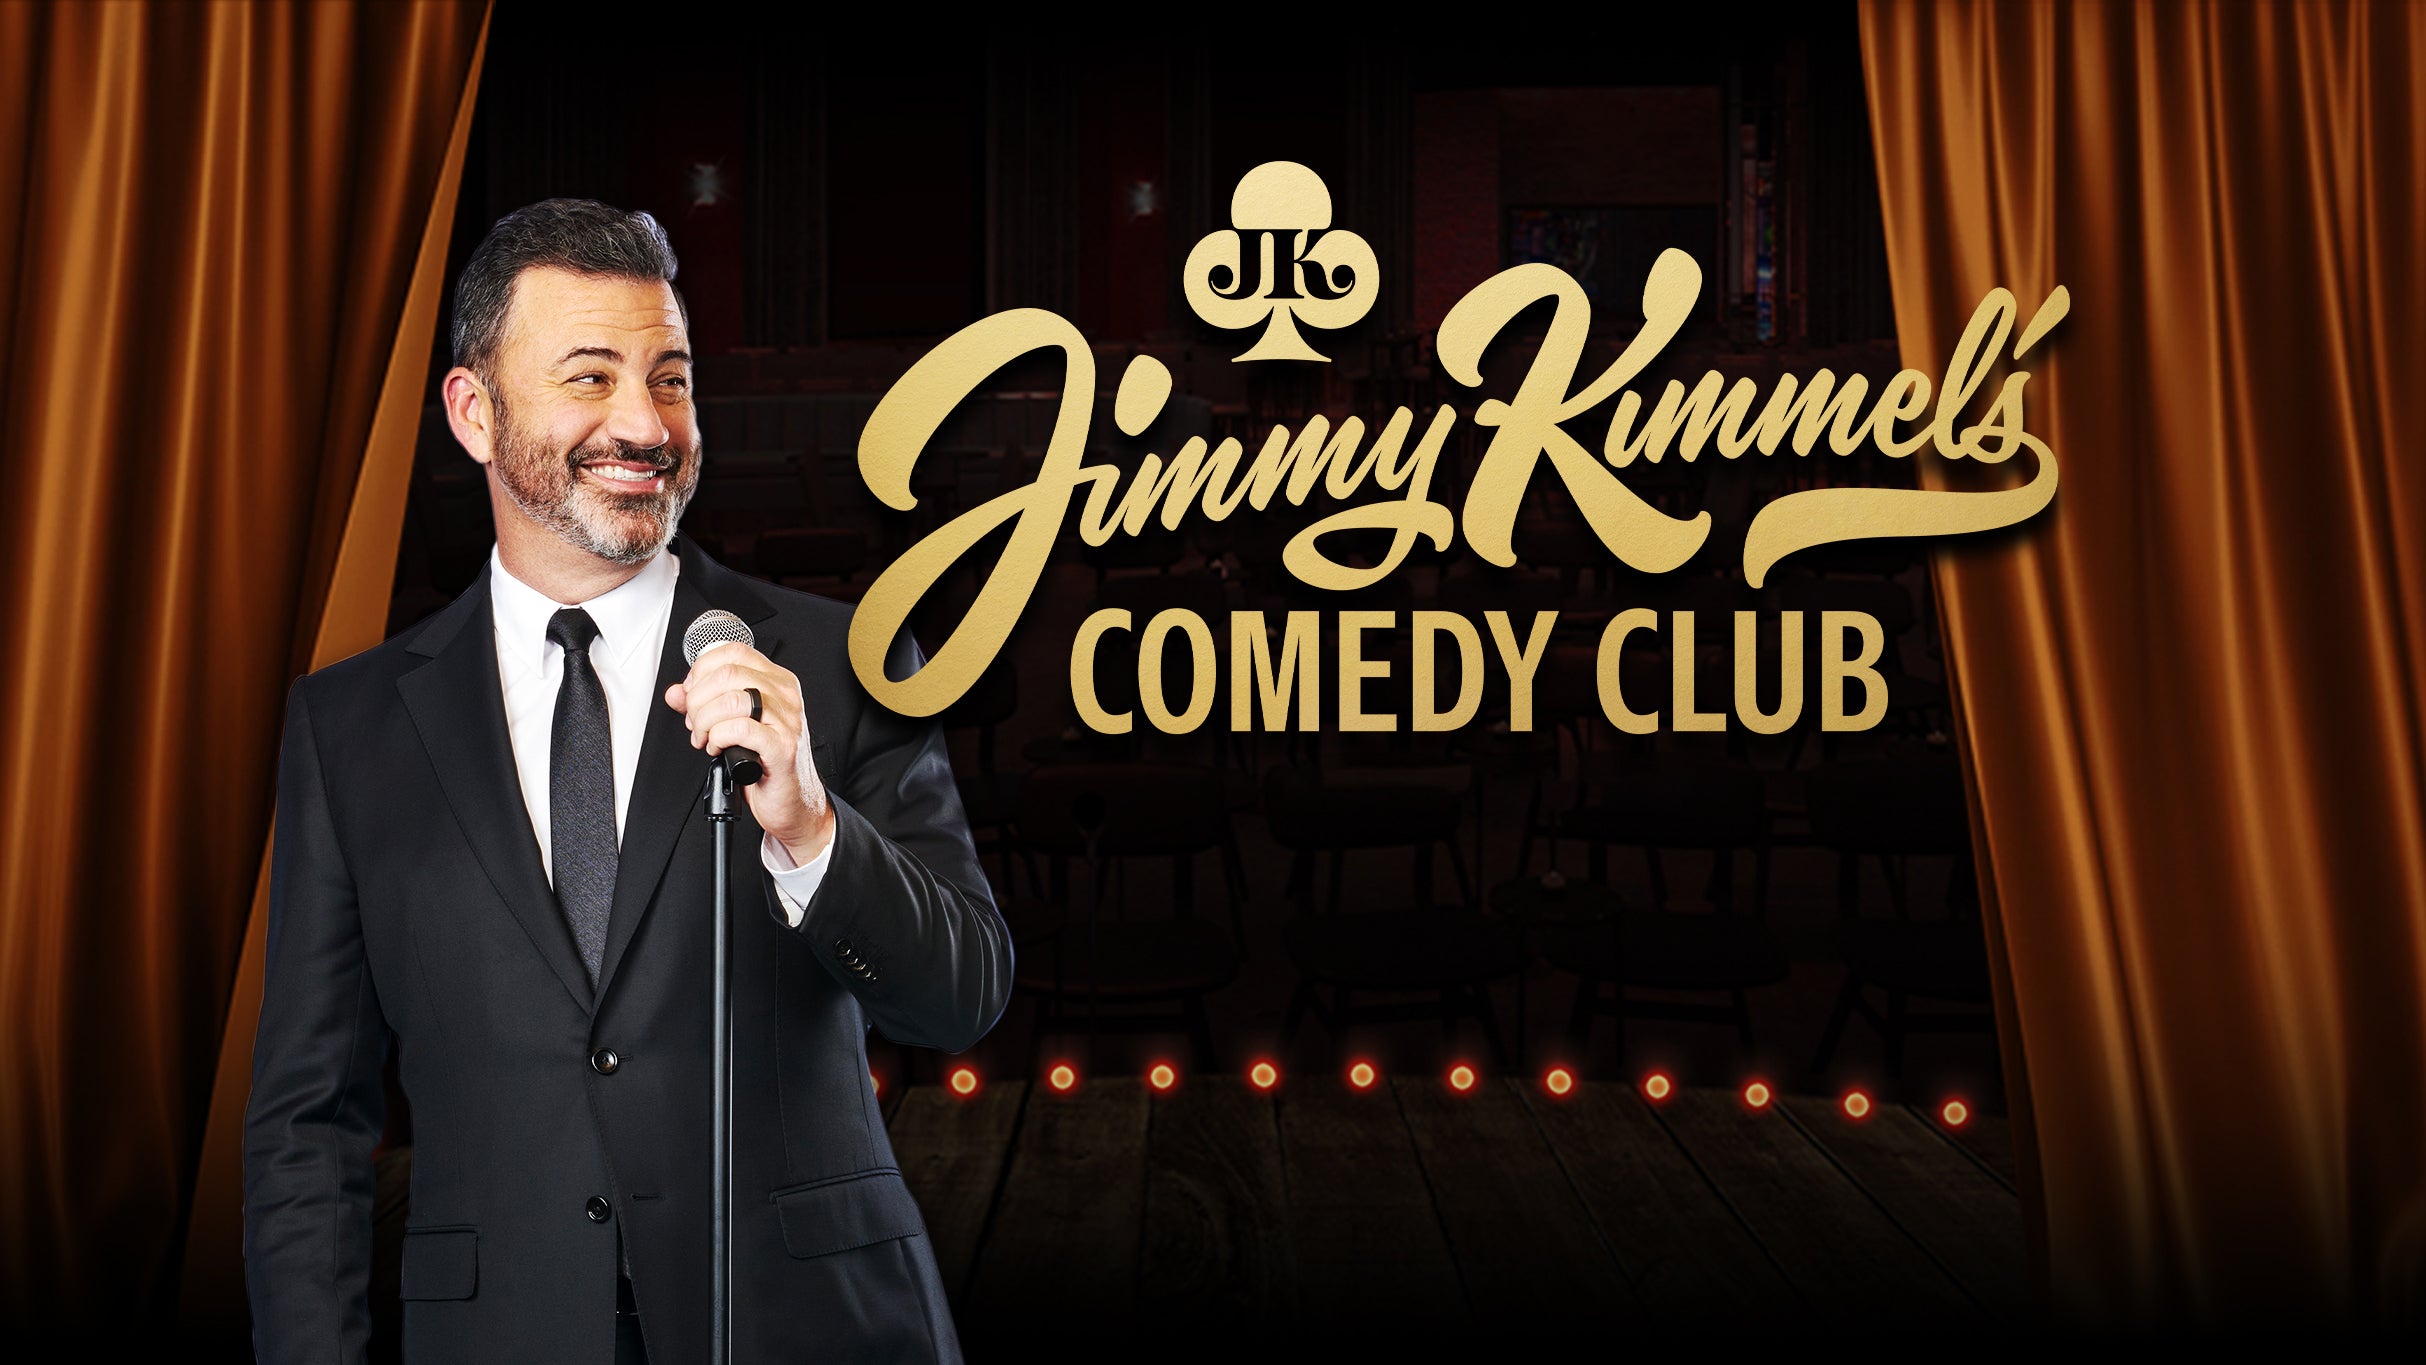 Show Your Skillz At Jimmy Kimmel's Comedy Club